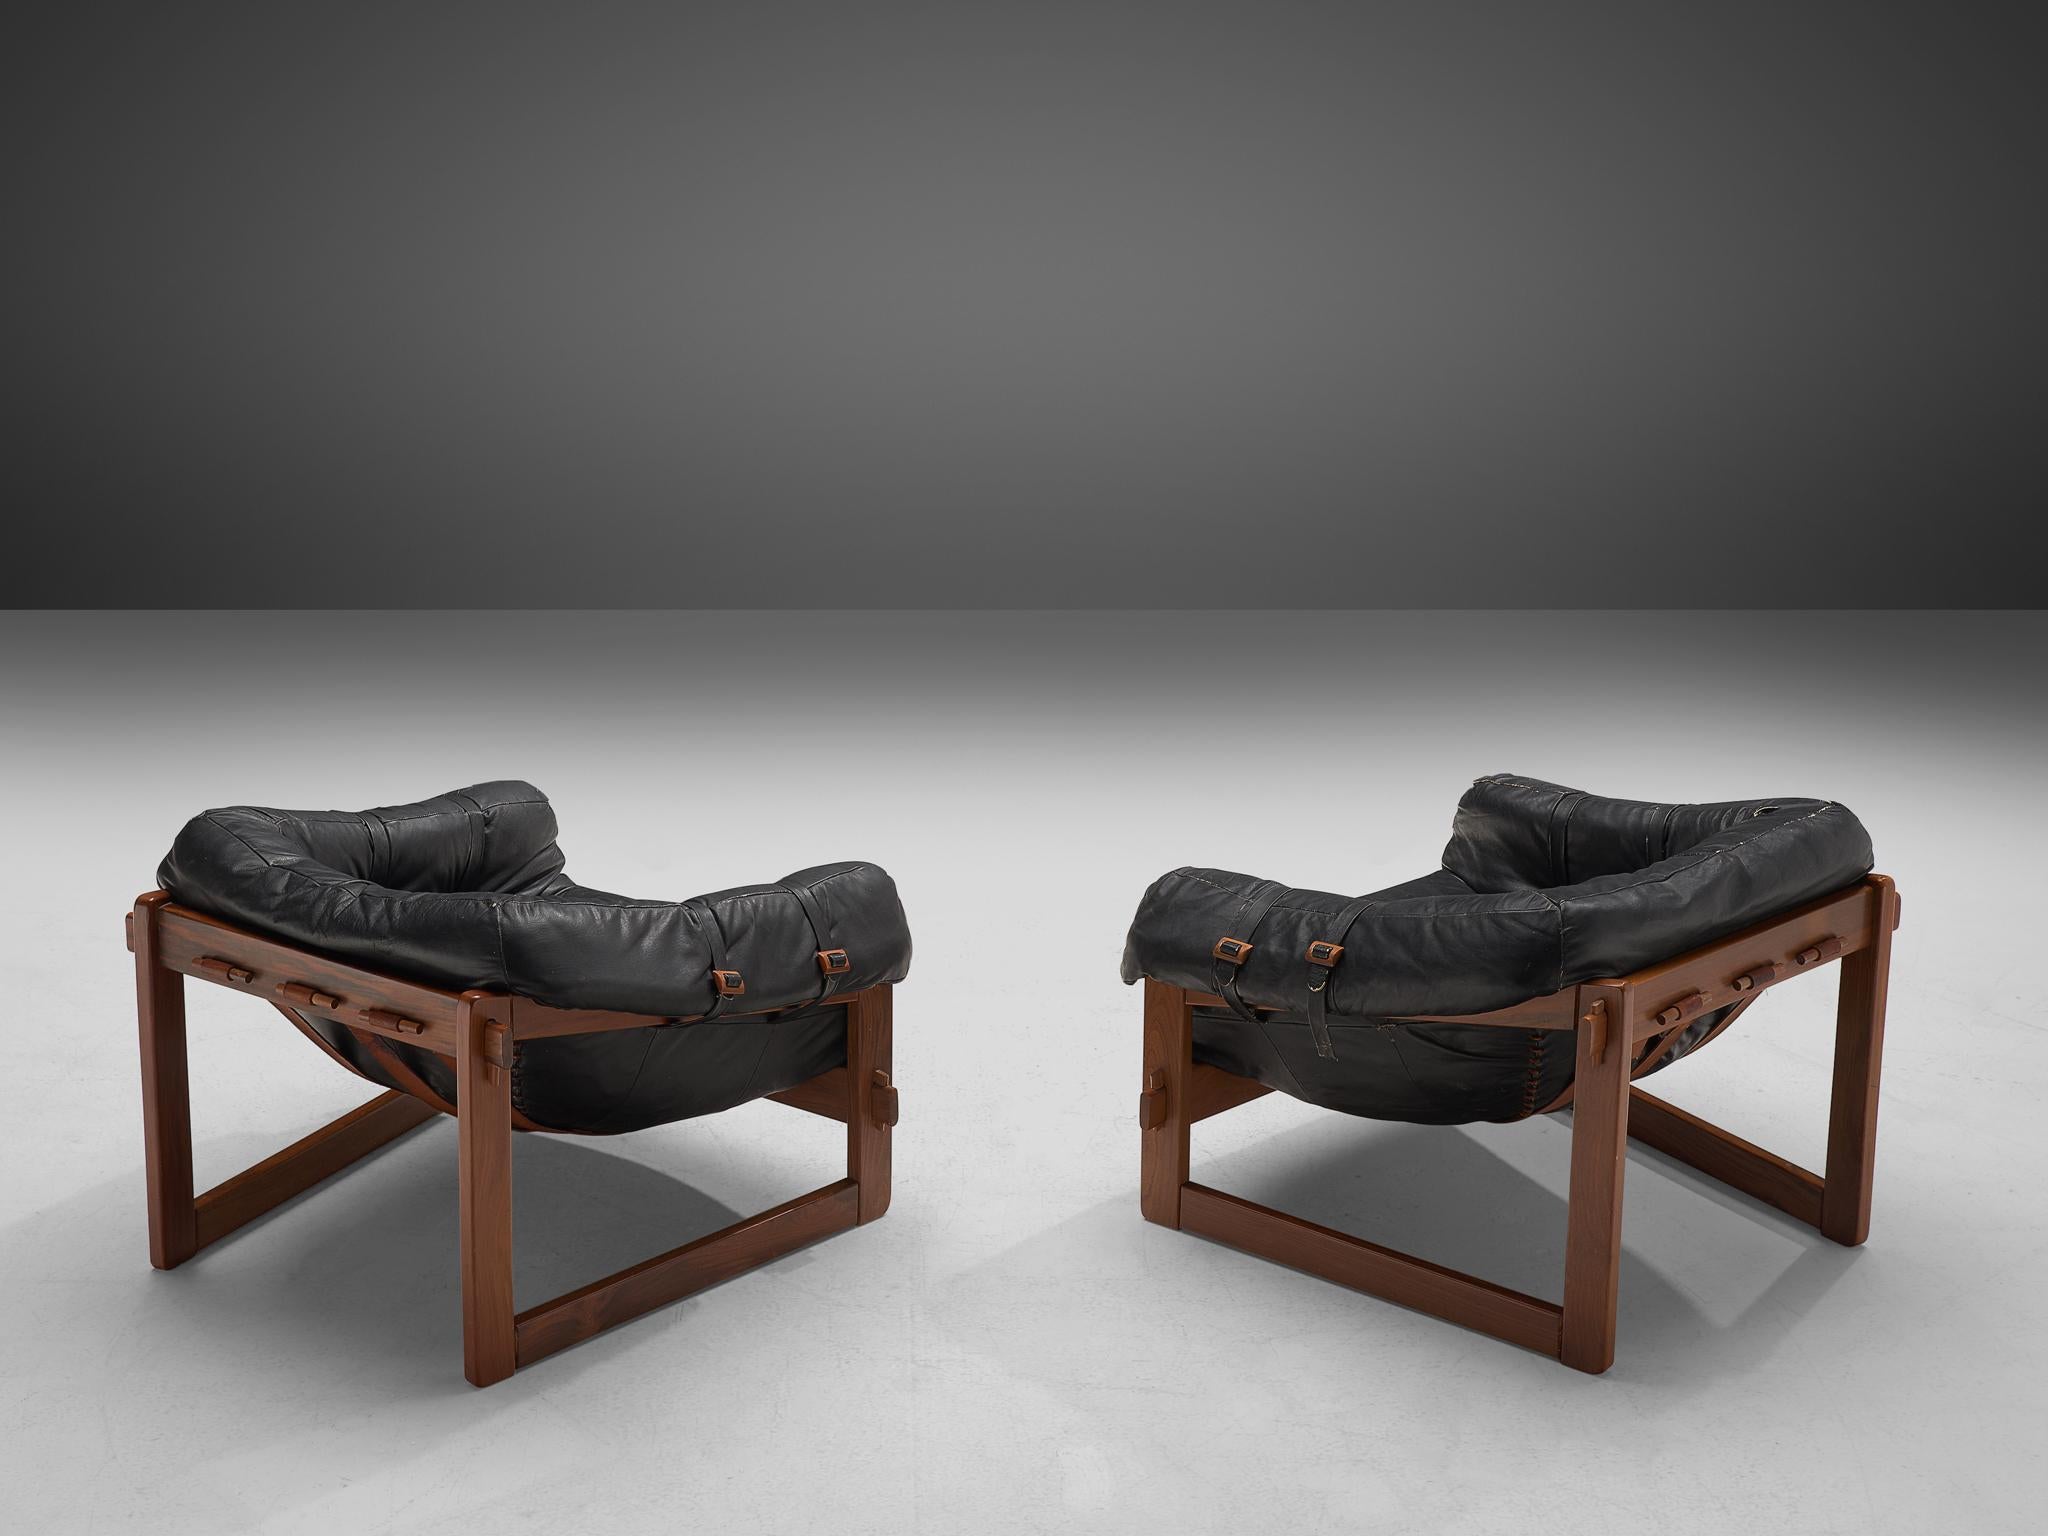 Percival Lafer, pair of lounge chairs, leather and wood, Brazil, 1960s

Bulky and grand lounge chairs by Brazilian designer Percival Lafer. This set features a solid dark wooden base with leather straps spanned between the slats. The tufted leather